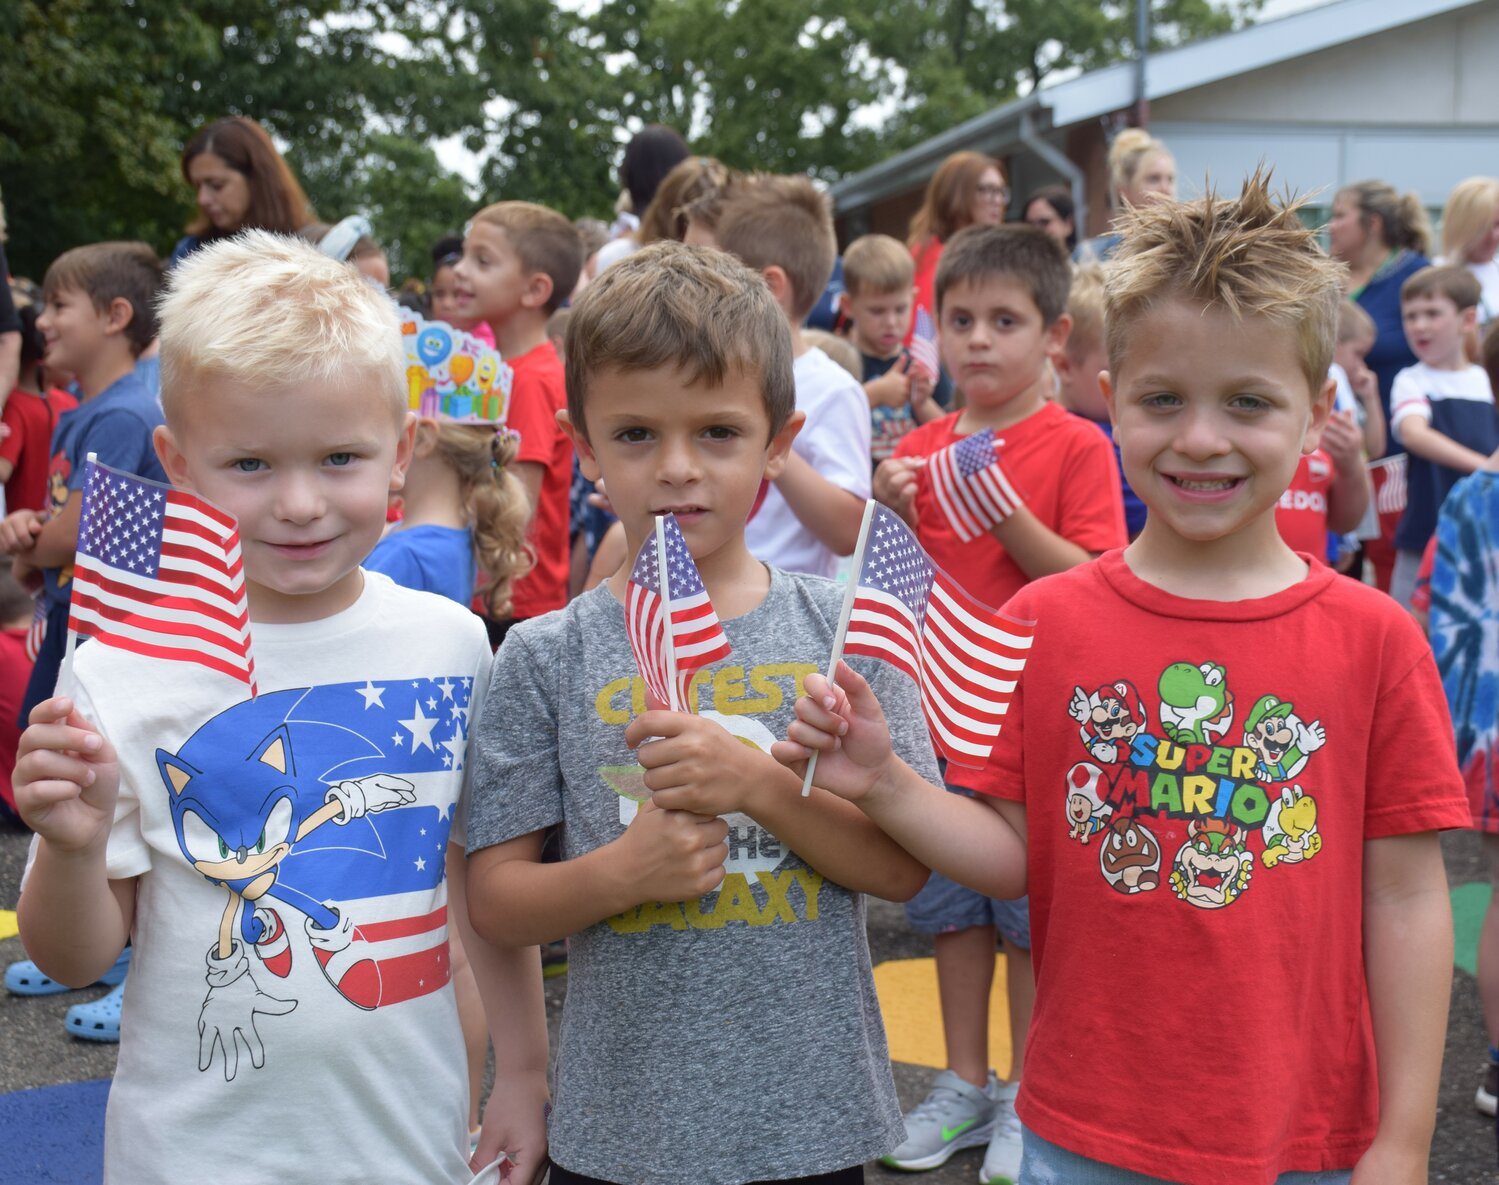 Bayville Primary School students James Laviano, left, Jack Lemma and Paul Chirichella planted flags in front of the school with their classmates to honor the victims of the Sept. 11 attacks.